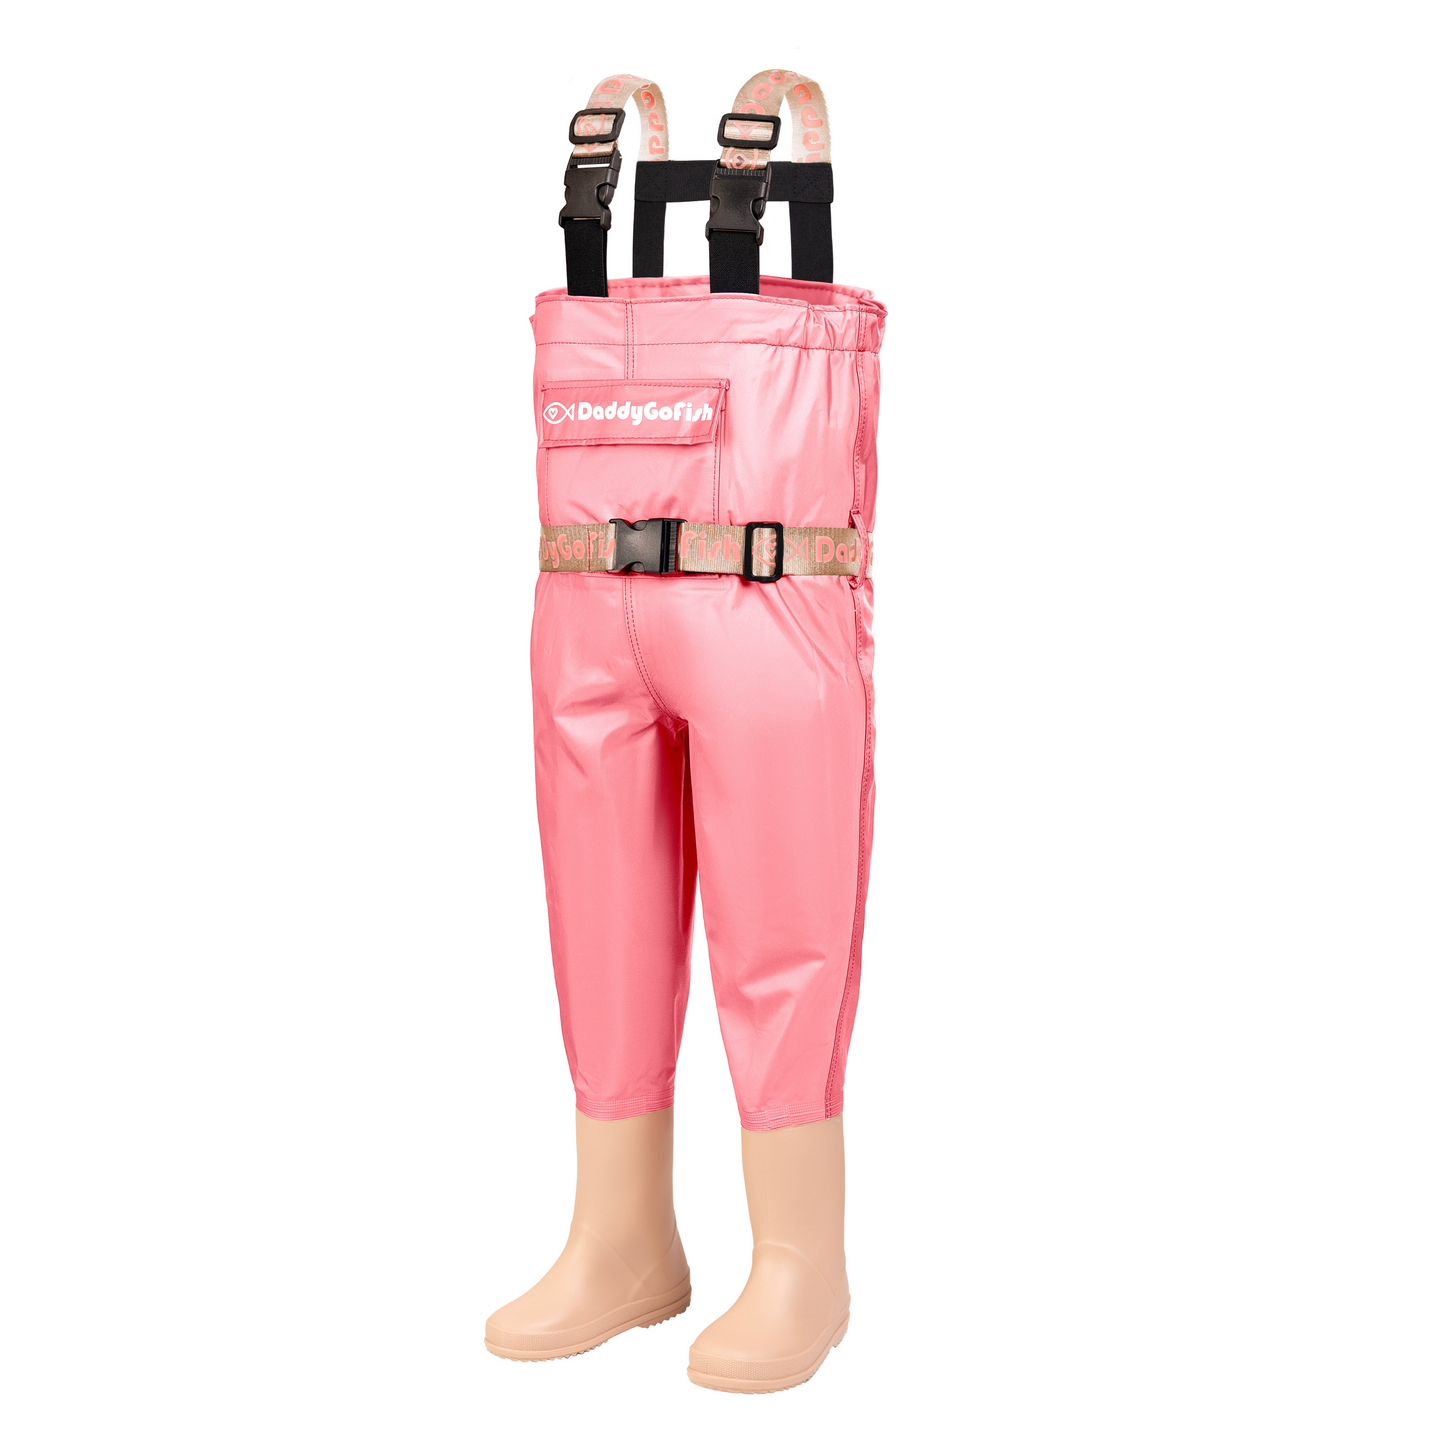 PVC Chest Waders for Kids, Pink Fishing and Hunting Waders, Waterproof, Easy To Clean